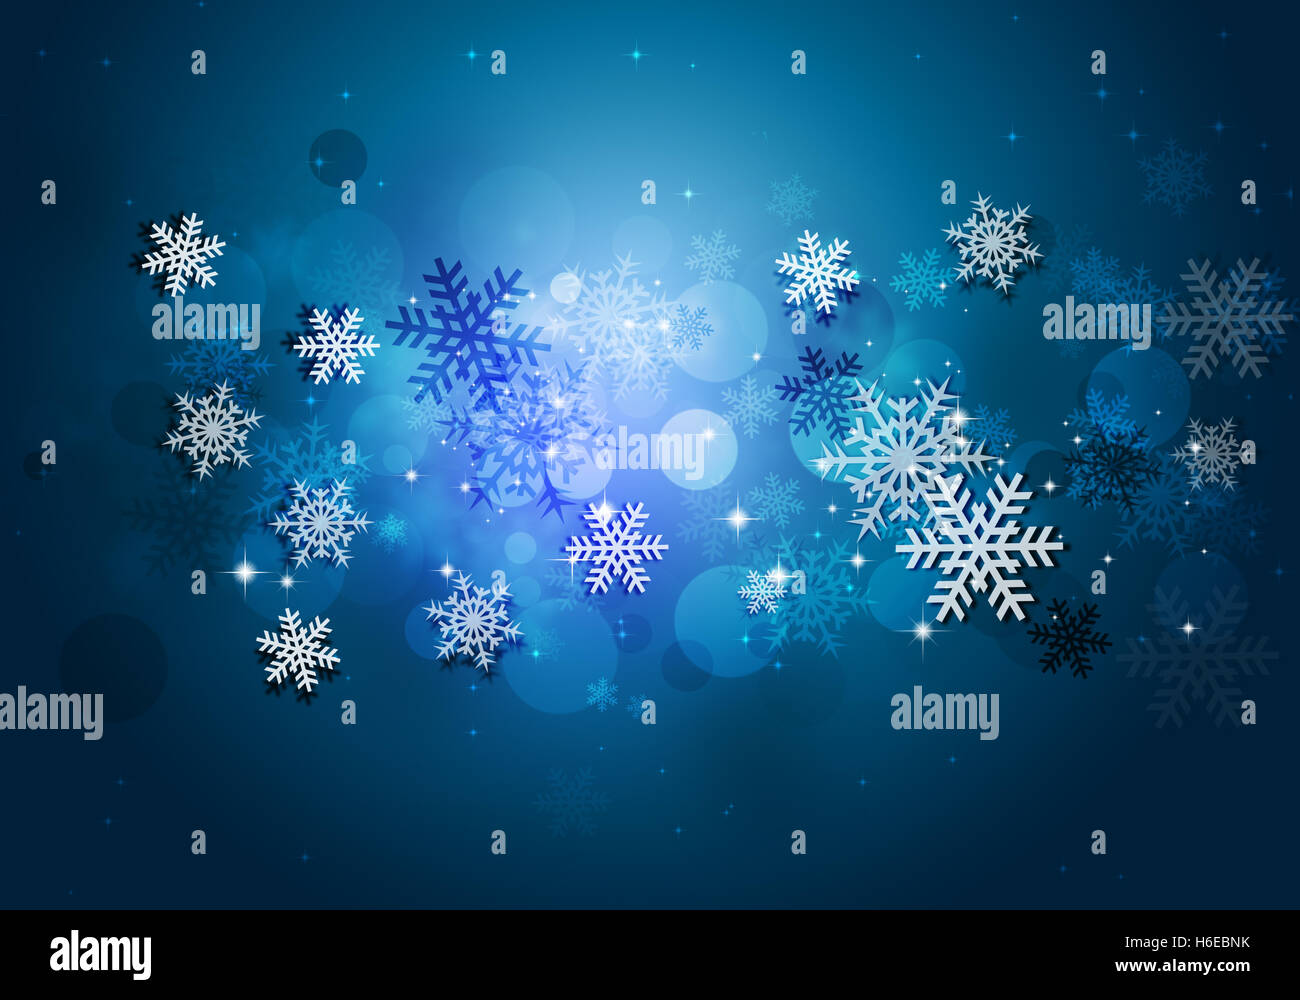 abstract winter holiday christmas blue card with snow and blurry lights Stock Photo